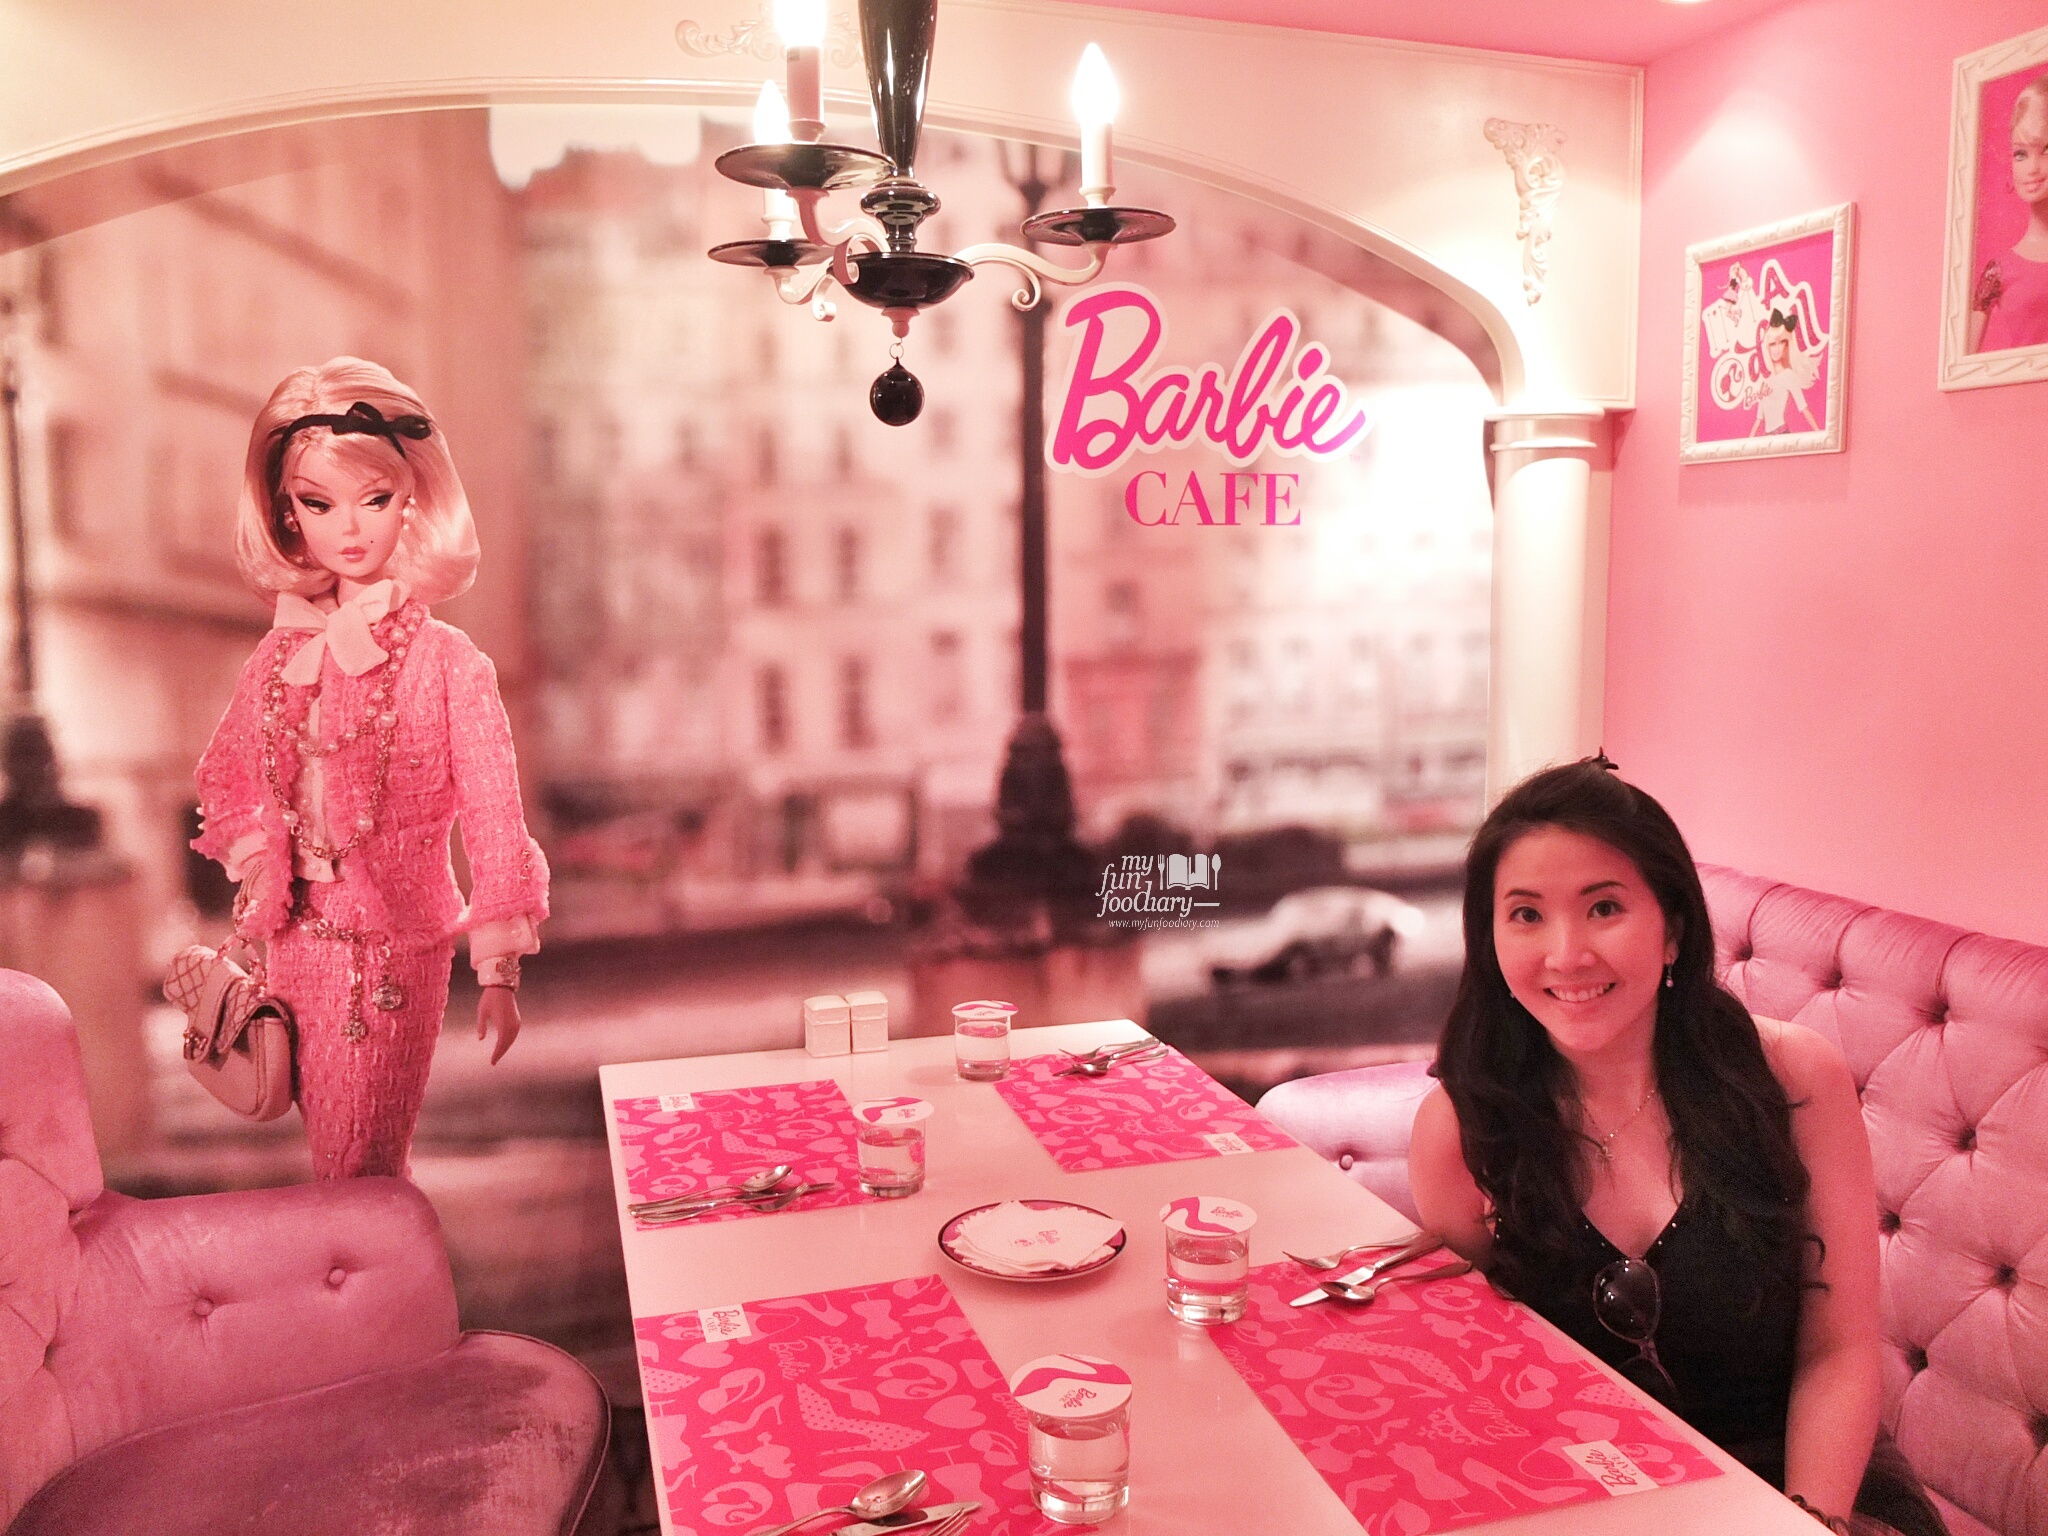 Good Times at Barbie Cafe Taiwan by Myfunfoodiary